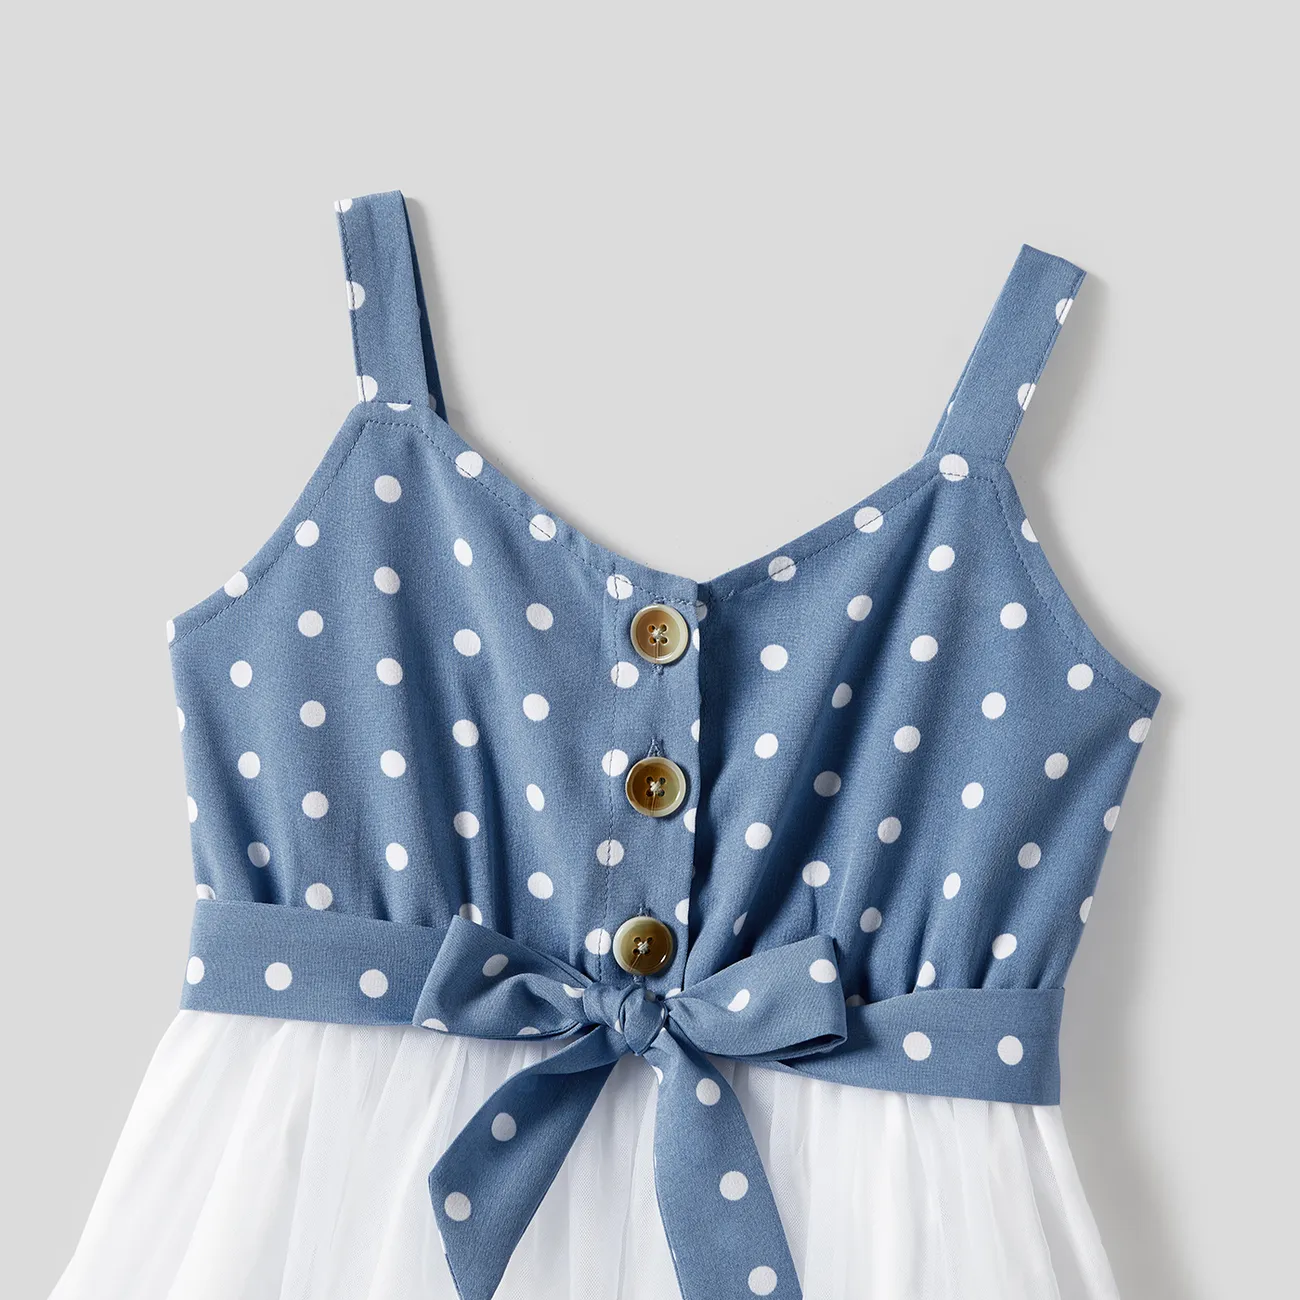 Mommy and Me Polka Dots Print Belted Cami Dresses Blue big image 1